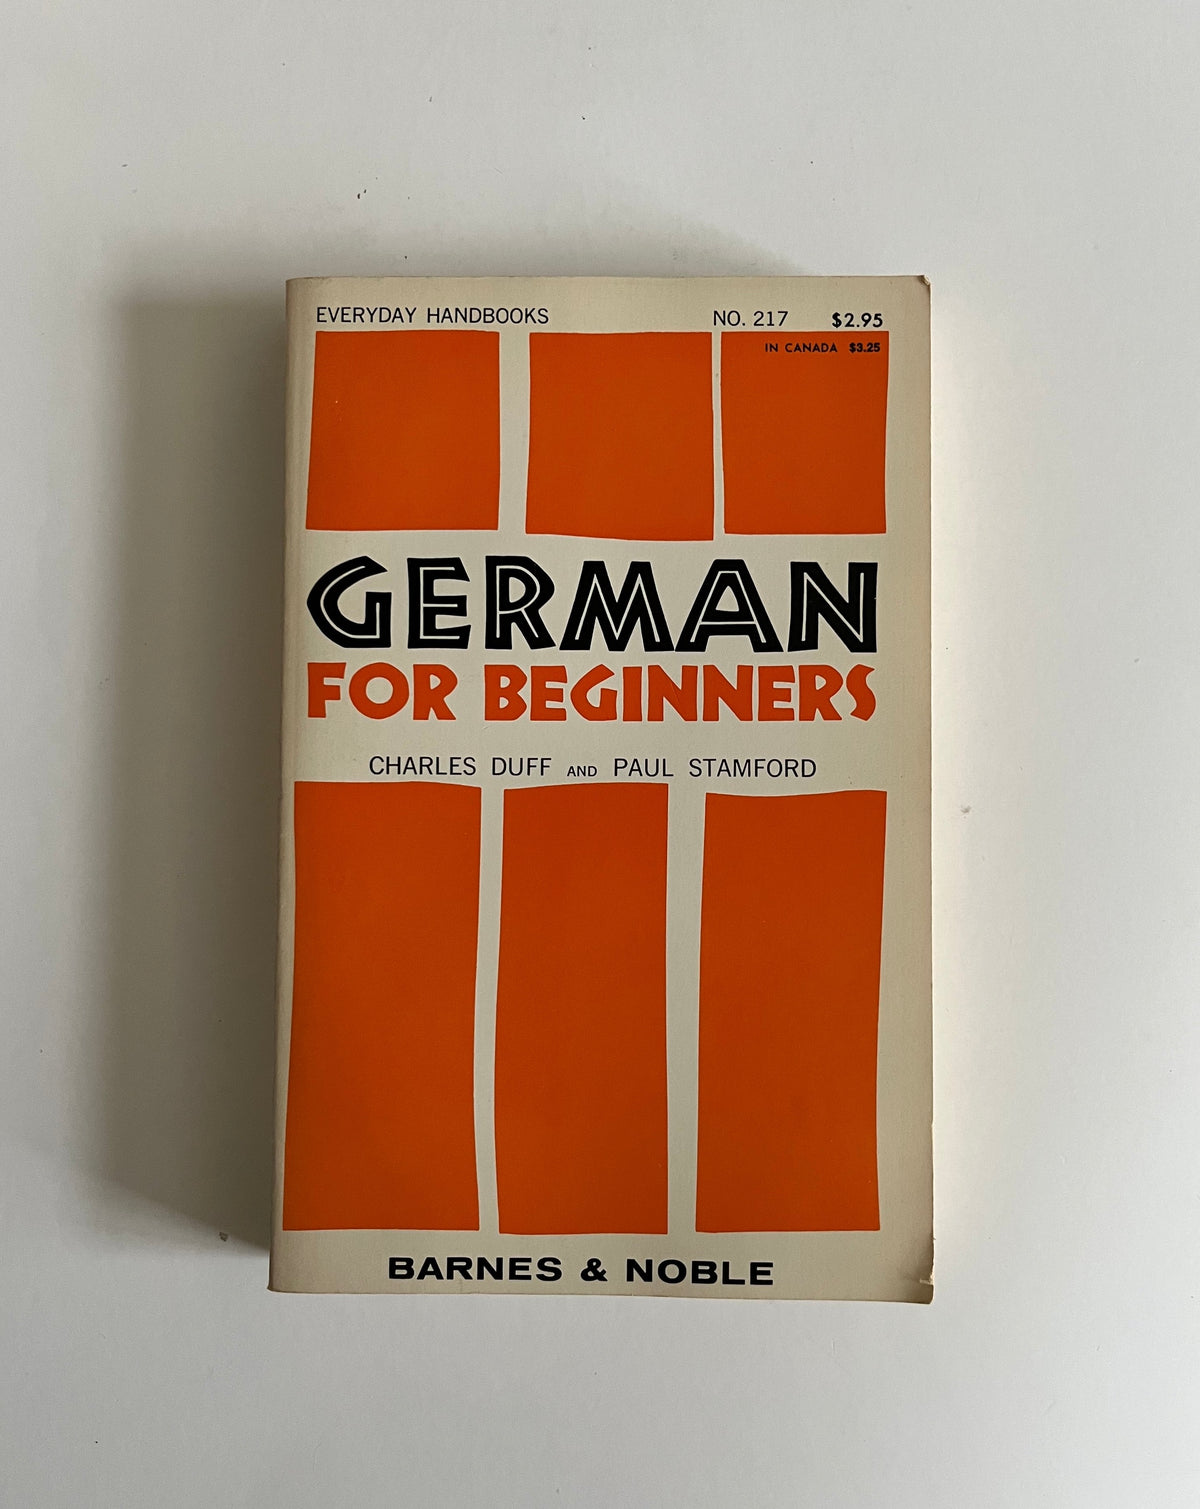 German for Beginners by Charles Duff and Paul Stamford